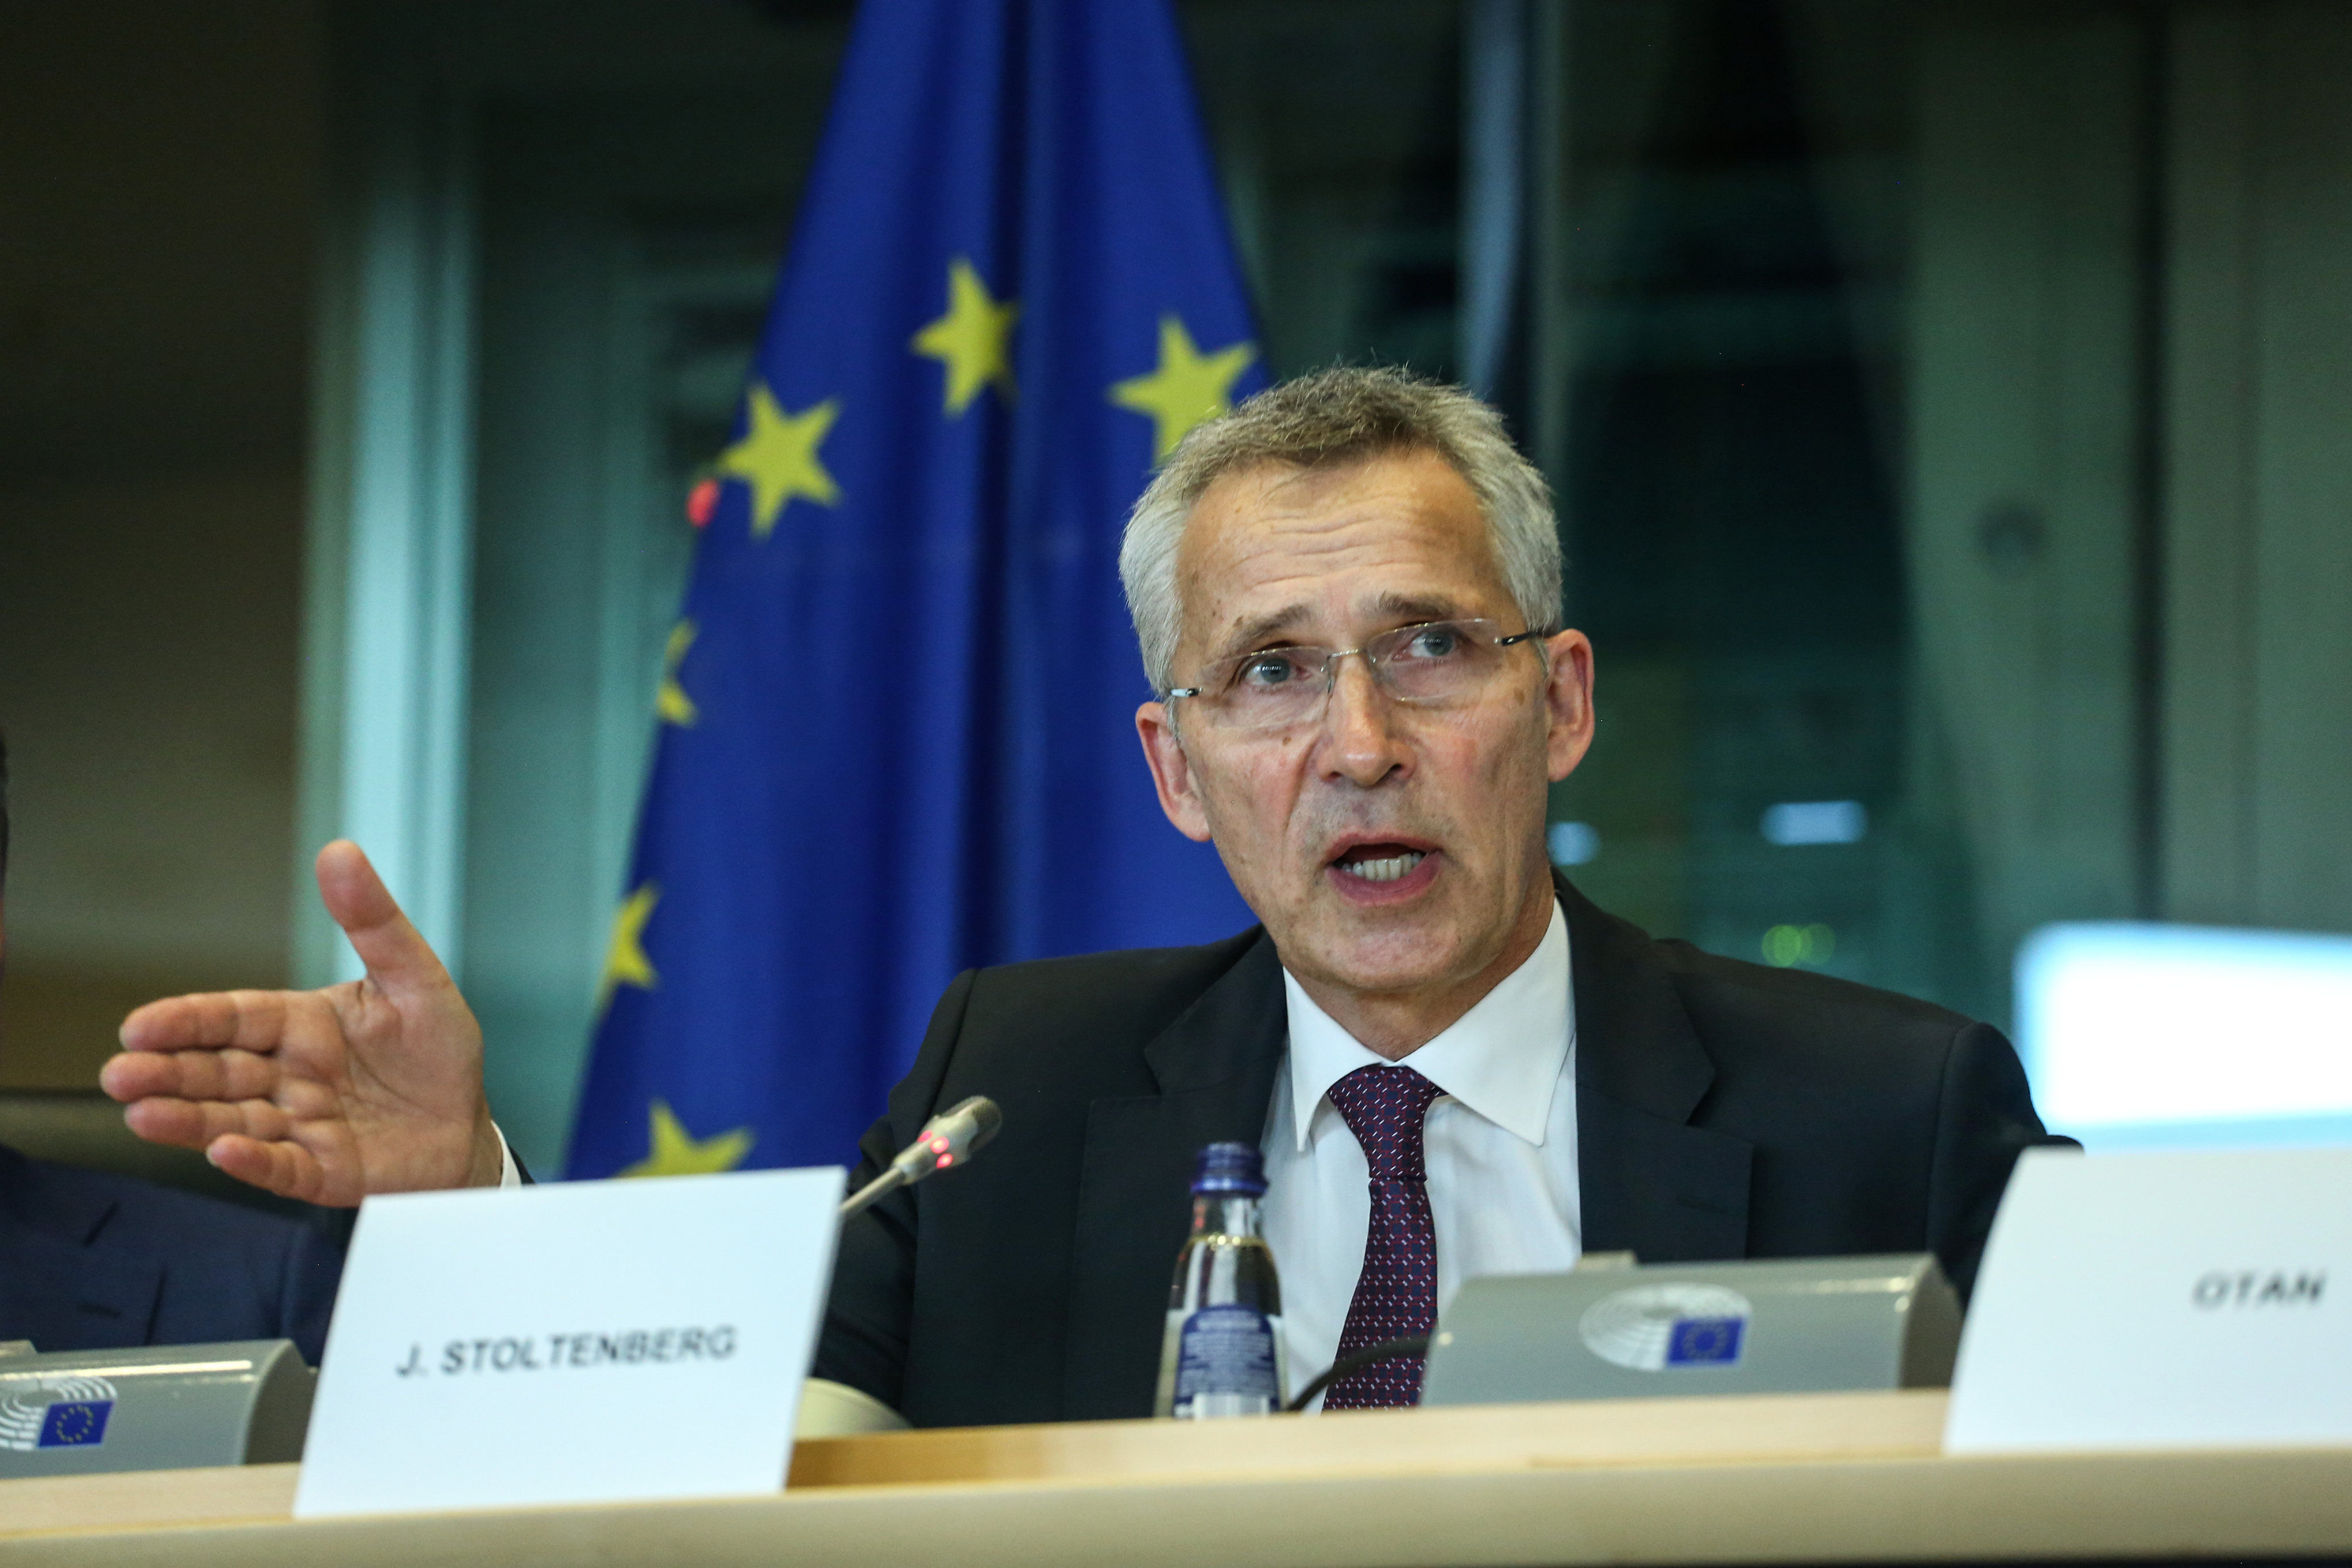 Nato Secretary General Jens Stoltenberg speaking on Wednesday at a joint meeting in Brussels of the European Parliament Committee on Foreign Affairs and the Subcommittee on Security and Defence to discuss the Nato summit decisions and on cooperation between Nato and the European Union. Photo: ZUMA Press Wire/dpa